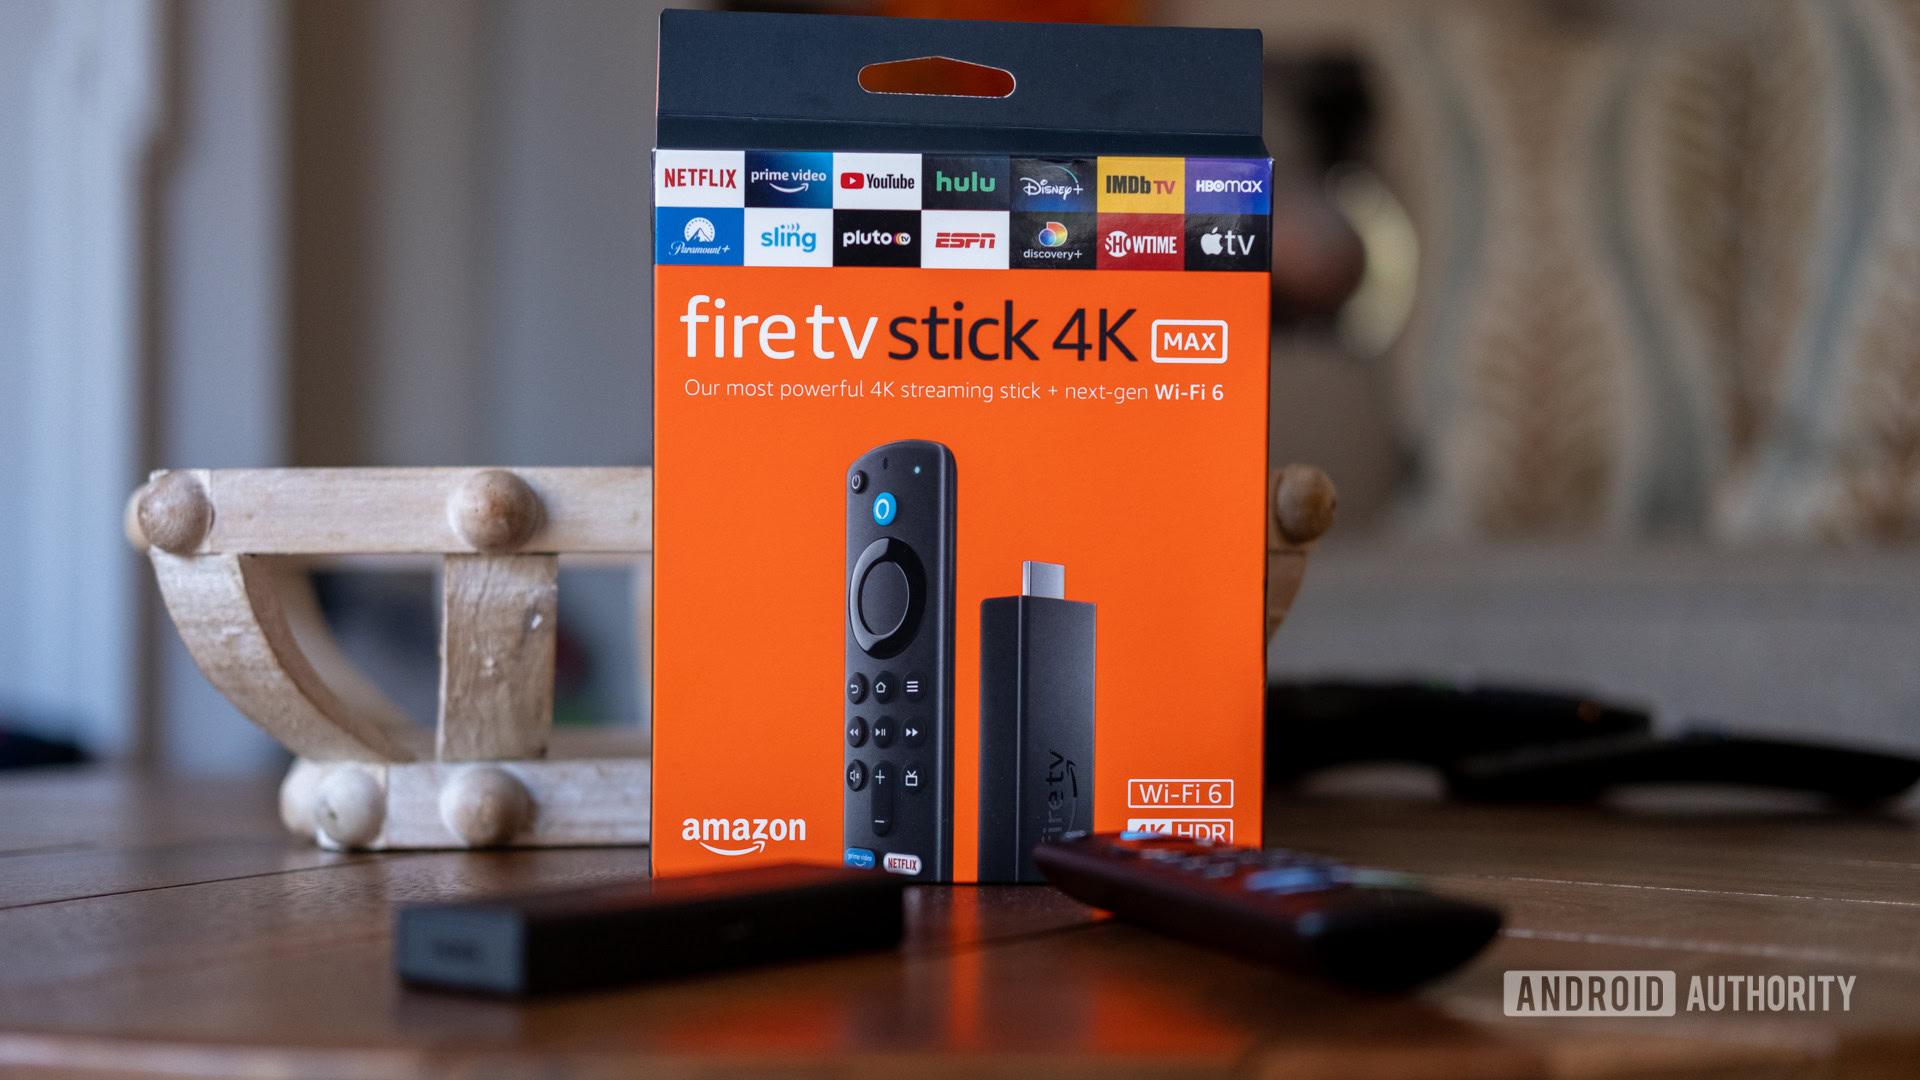 The Fire TV Stick 4K Max box on a table